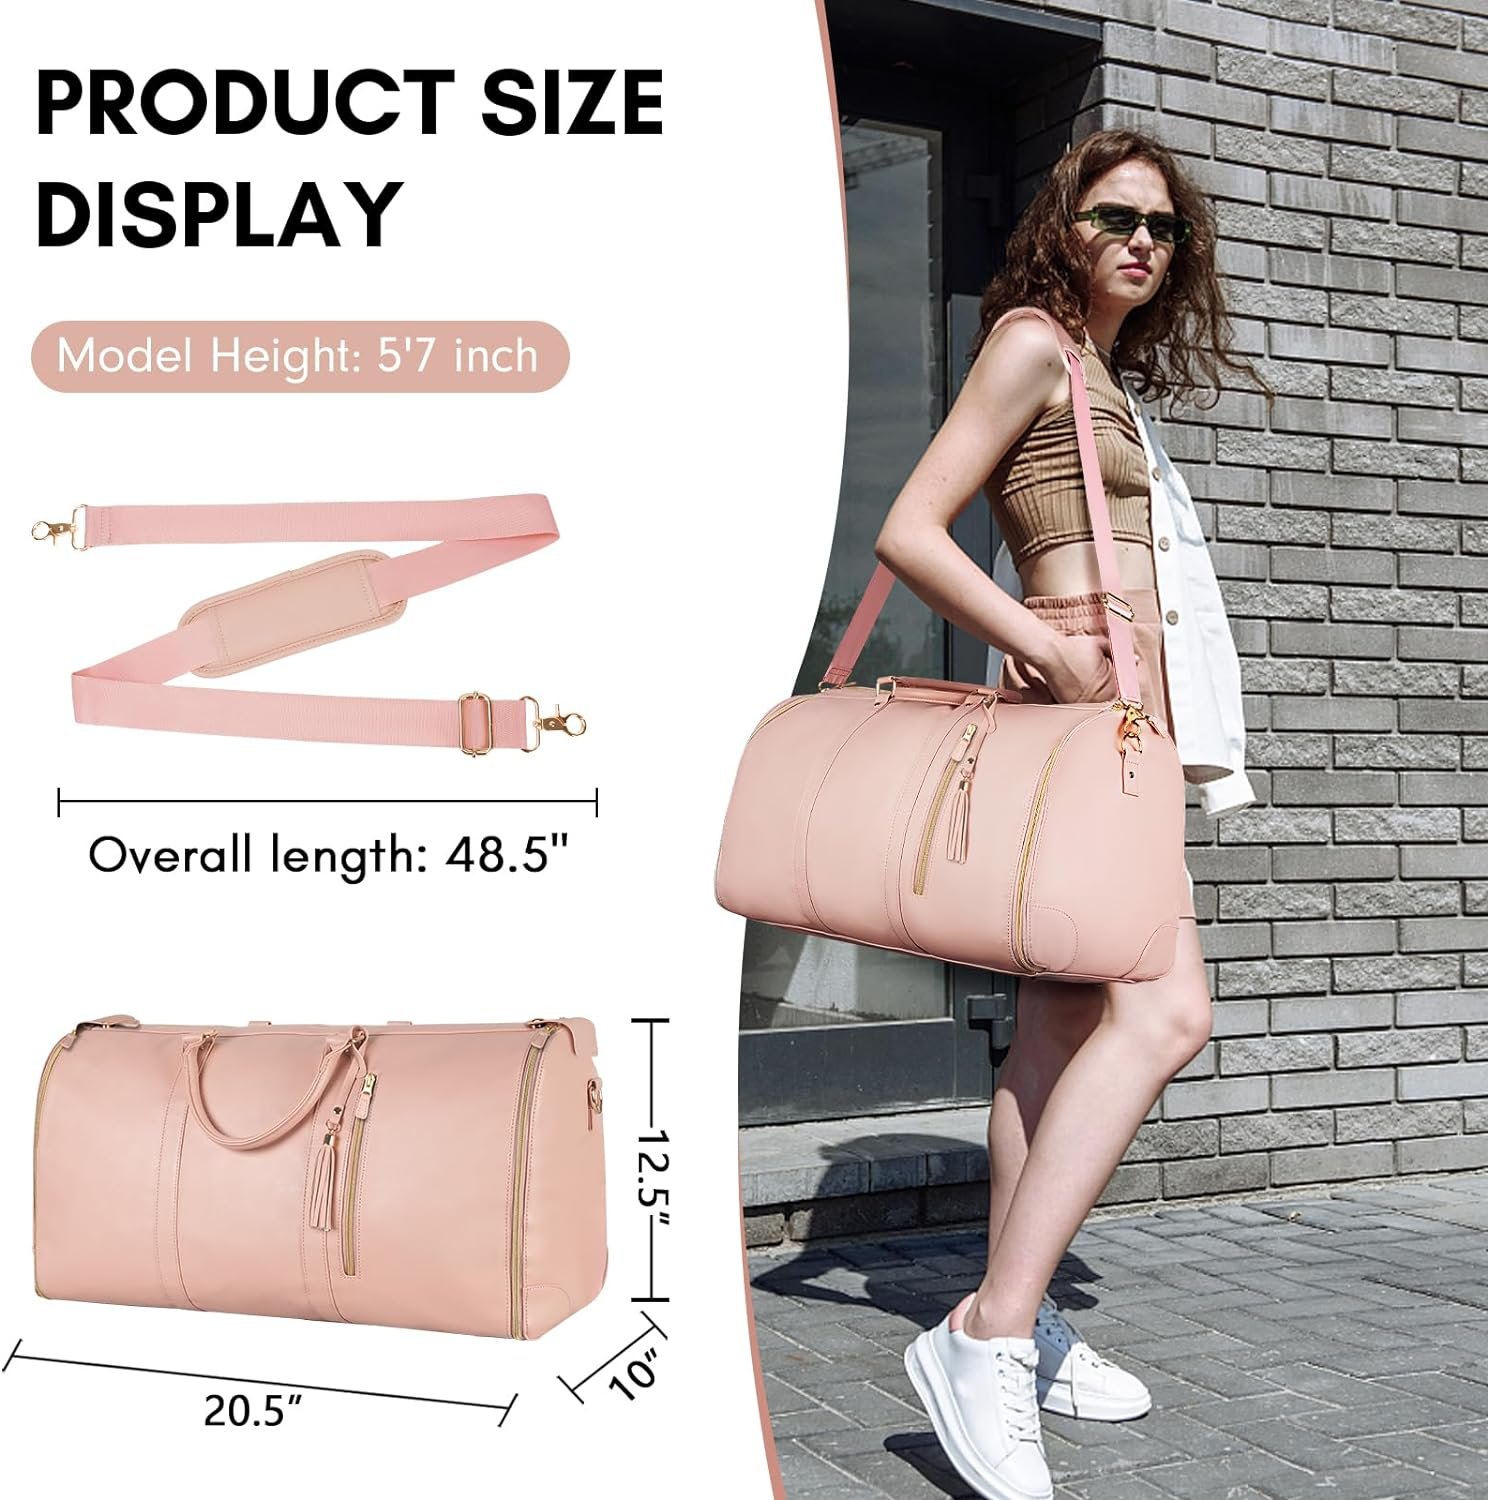 Carry On Garment Bag, Large PU Leather Duffle Bag for Women, Waterproof Garment Bags for Travel with Shoe Pouch, 2 in 1 Hanging Suitcase Suit Travel Bags, Gifts for Women, Pink